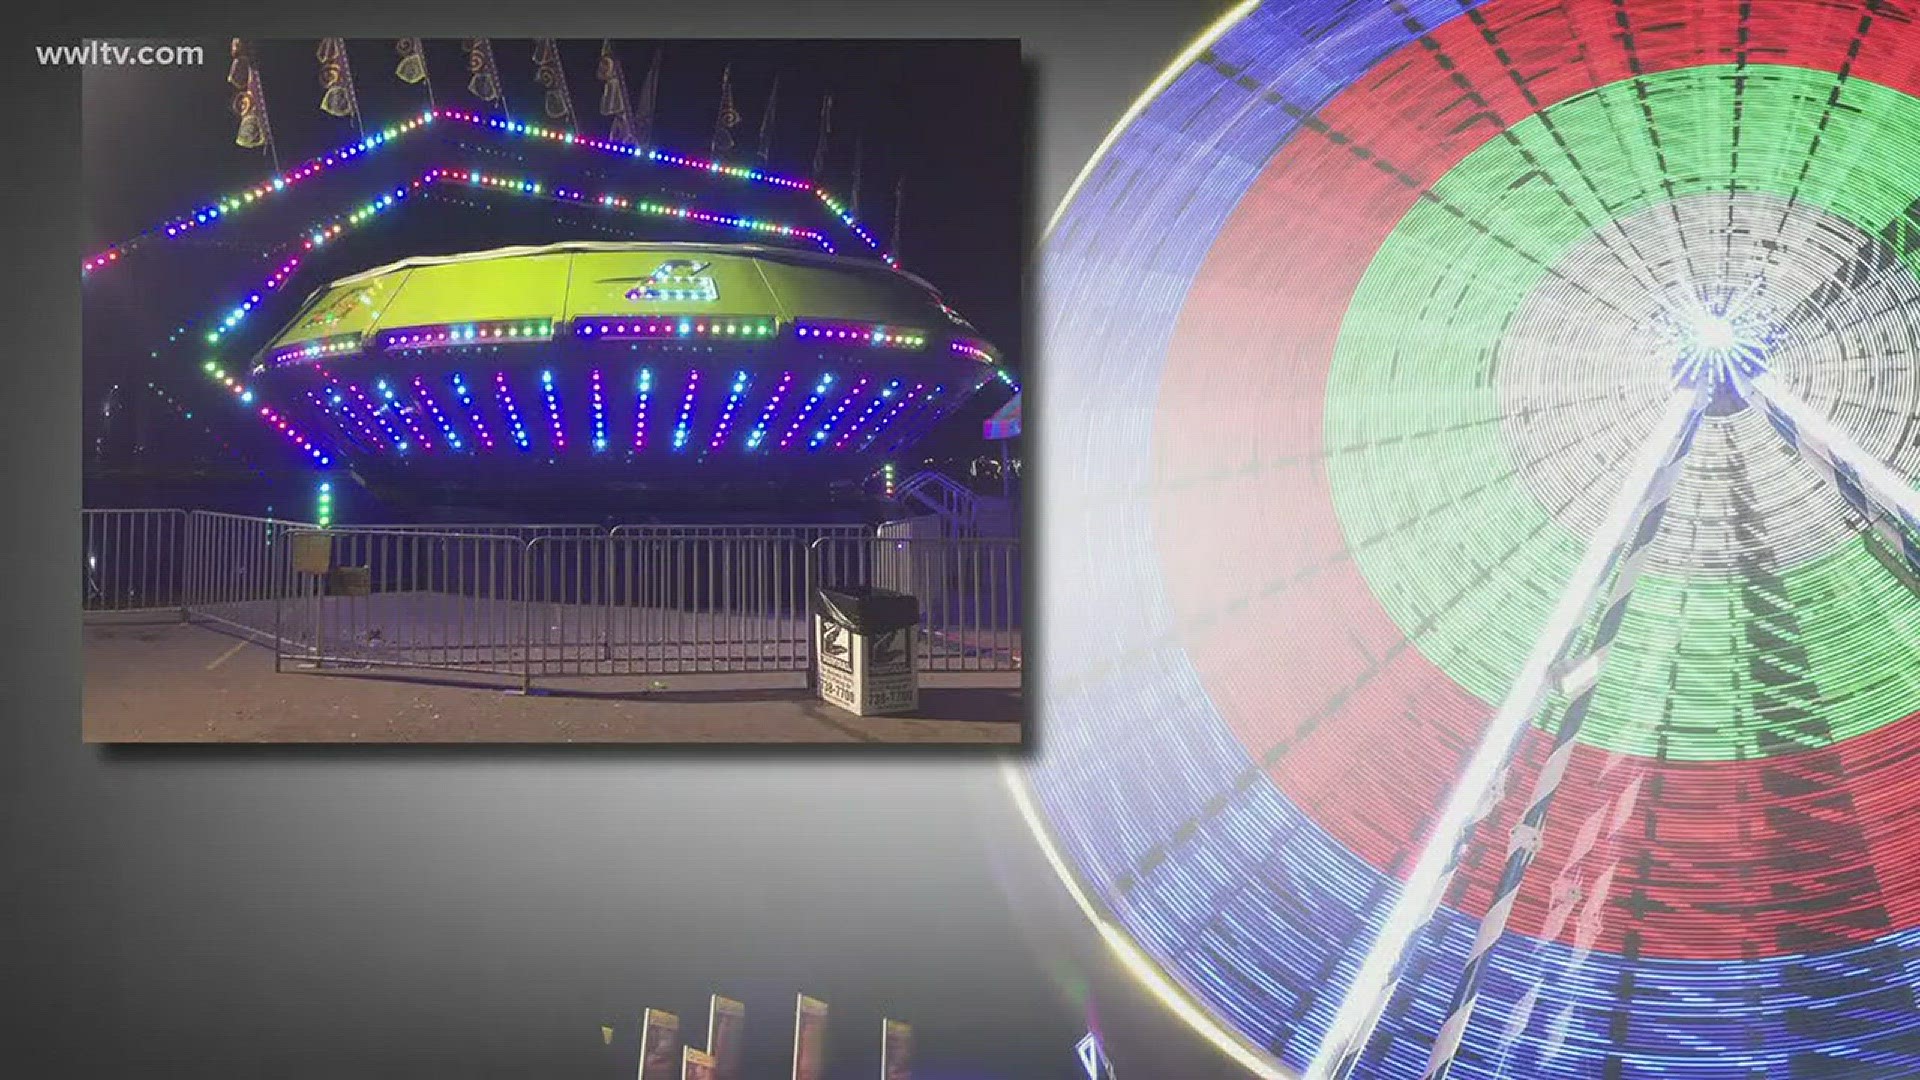 A trip to a neighborhood church fair left a Metairie woman and her 8-year-old son dizzy and concerned about safety after the spinning carnival ride they were on couldn't stop.